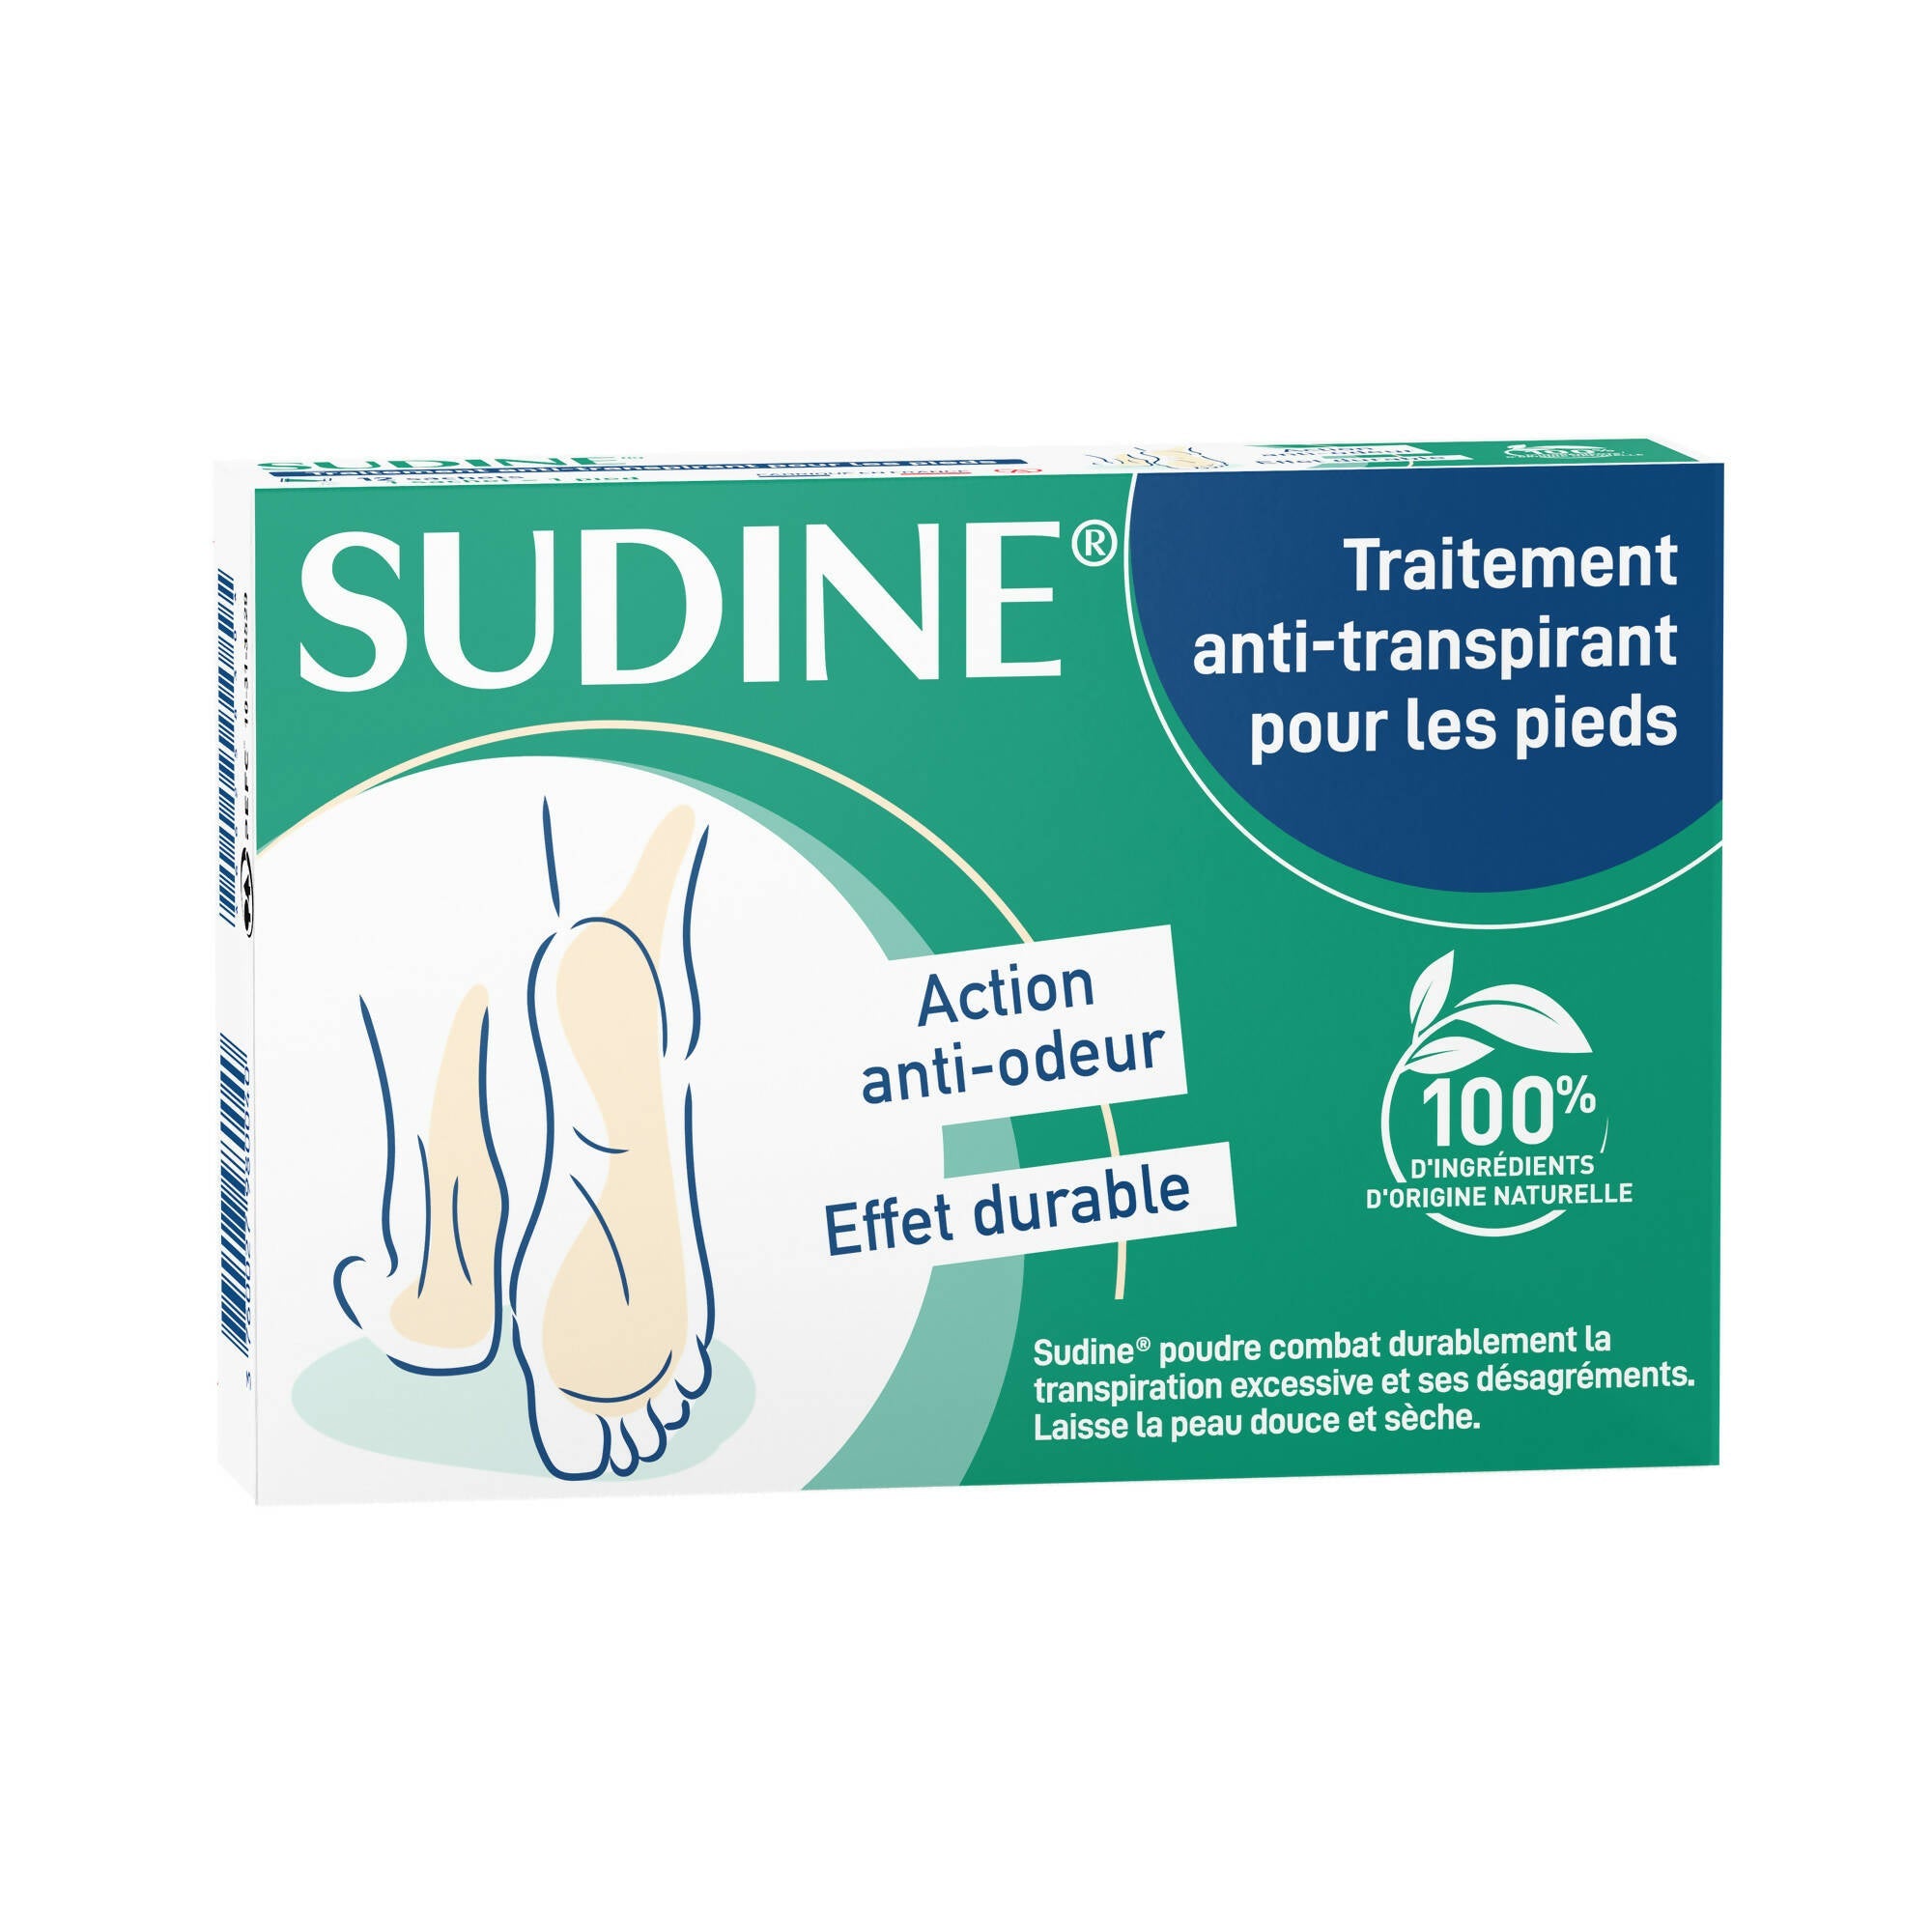 SORIFA - Set of 3 - Sudine Powder Antiperspirant Treatment - Foot - Regulates perspiration - Absorbs - Prevents fungal infections - Without aluminum salts - Made in France - Box of 6 double sachets - 0